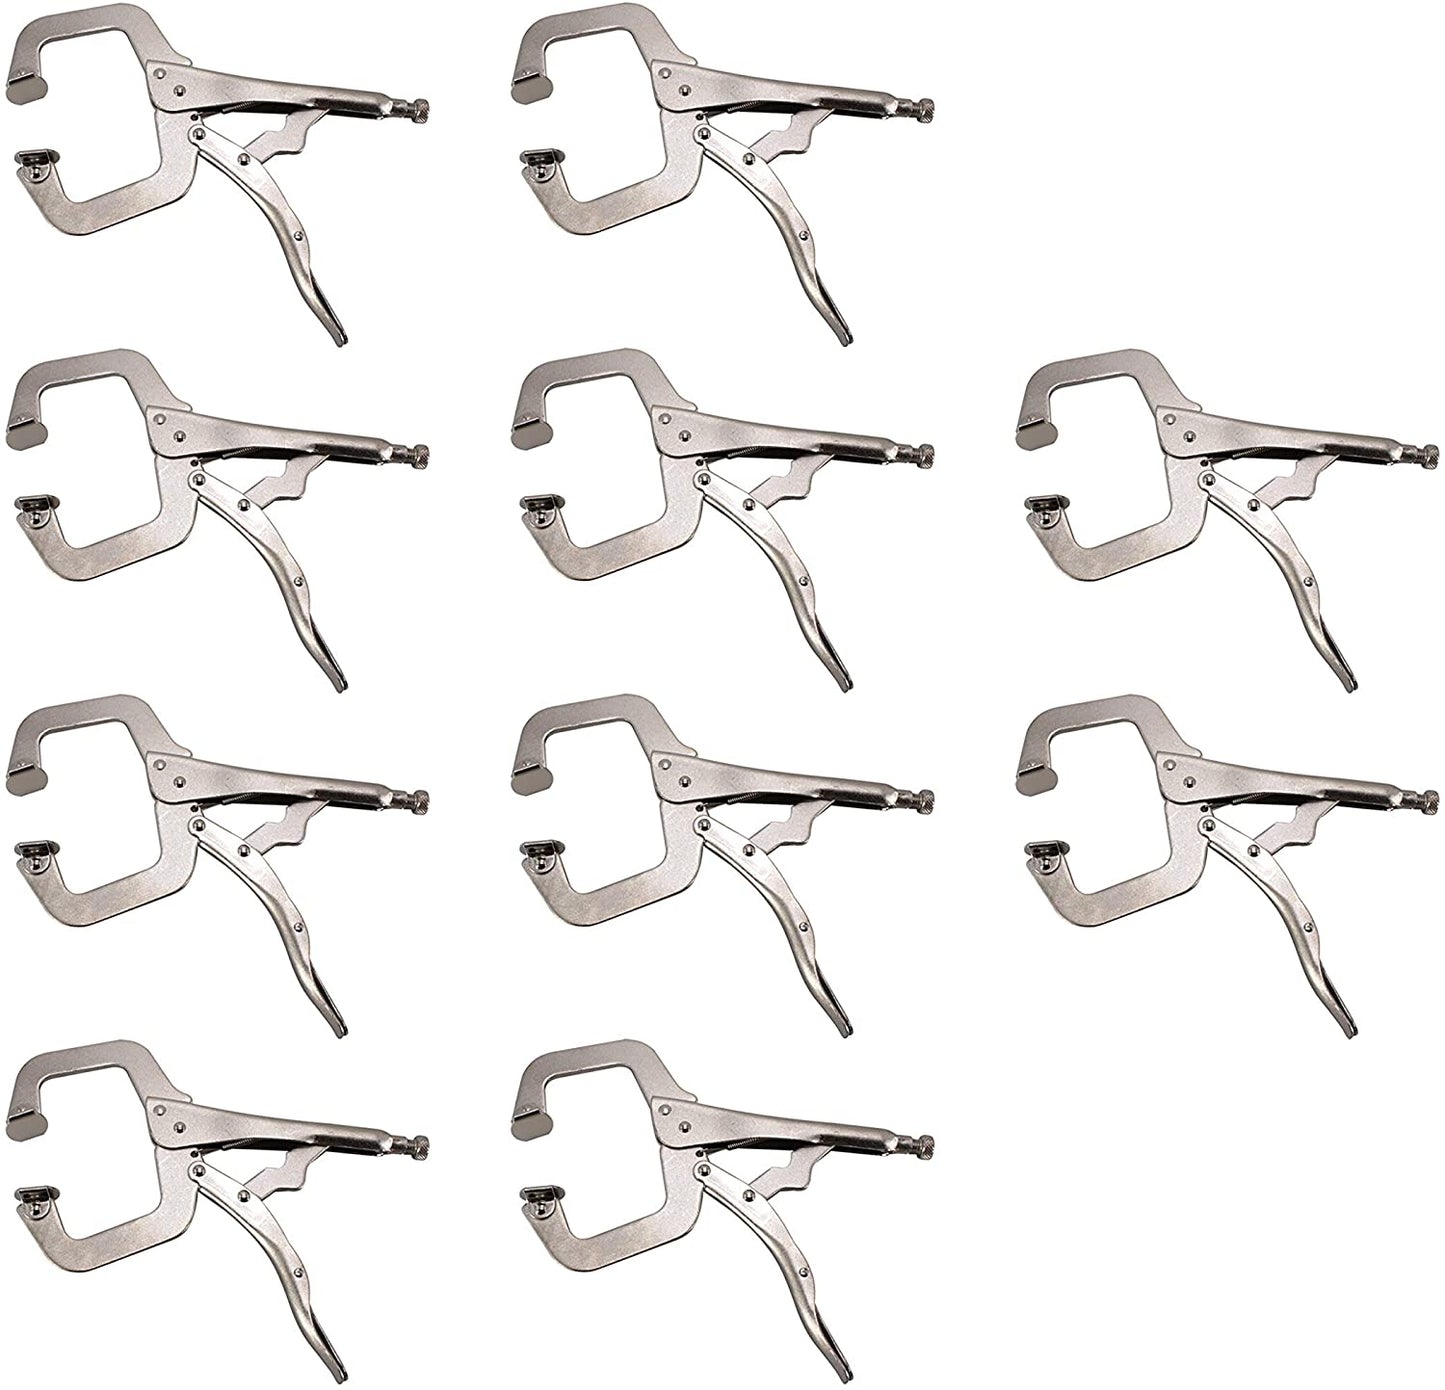 findmall 10Pcs 11 Inch Locking C Clamps with Swivel Pads Heavy Duty C-Type Locking Plier Table and Tool Vise Grip FINDMALLPARTS